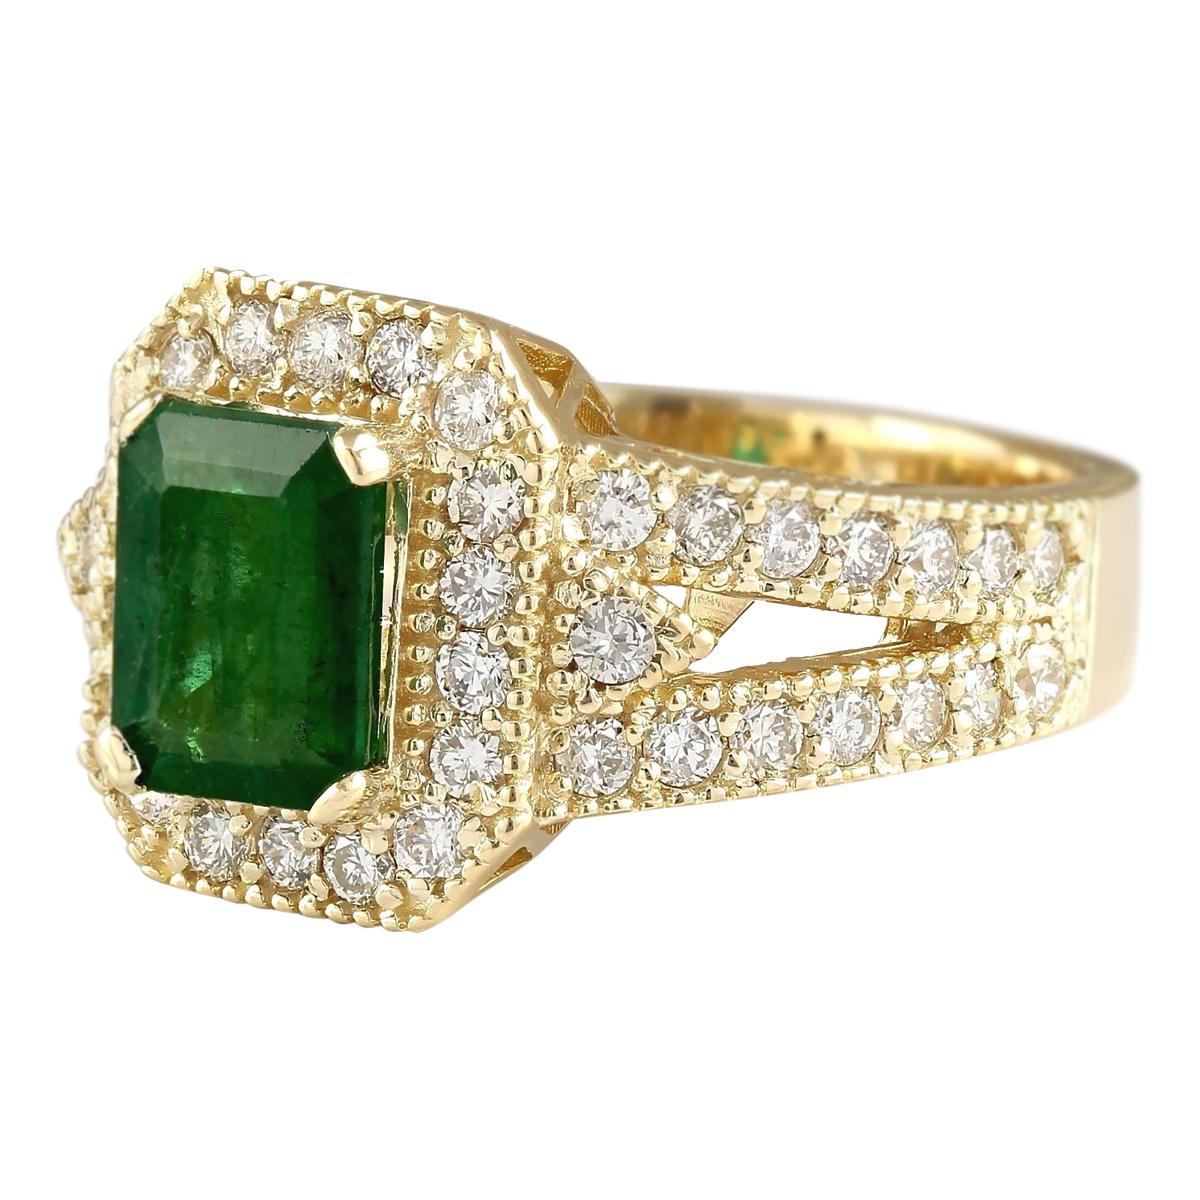 2.60 Carat Natural Emerald 14 Karat Yellow Gold Diamond Ring
Stamped: 14K Yellow Gold
Total Ring Weight: 7.5 Grams
Emerald Weight is 1.60 Carat (Measures: 8.00x6.00 mm)
Diamond Weight is 1.00 Carat
Color: F-G, Clarity: VS2-SI1
Face Measures: